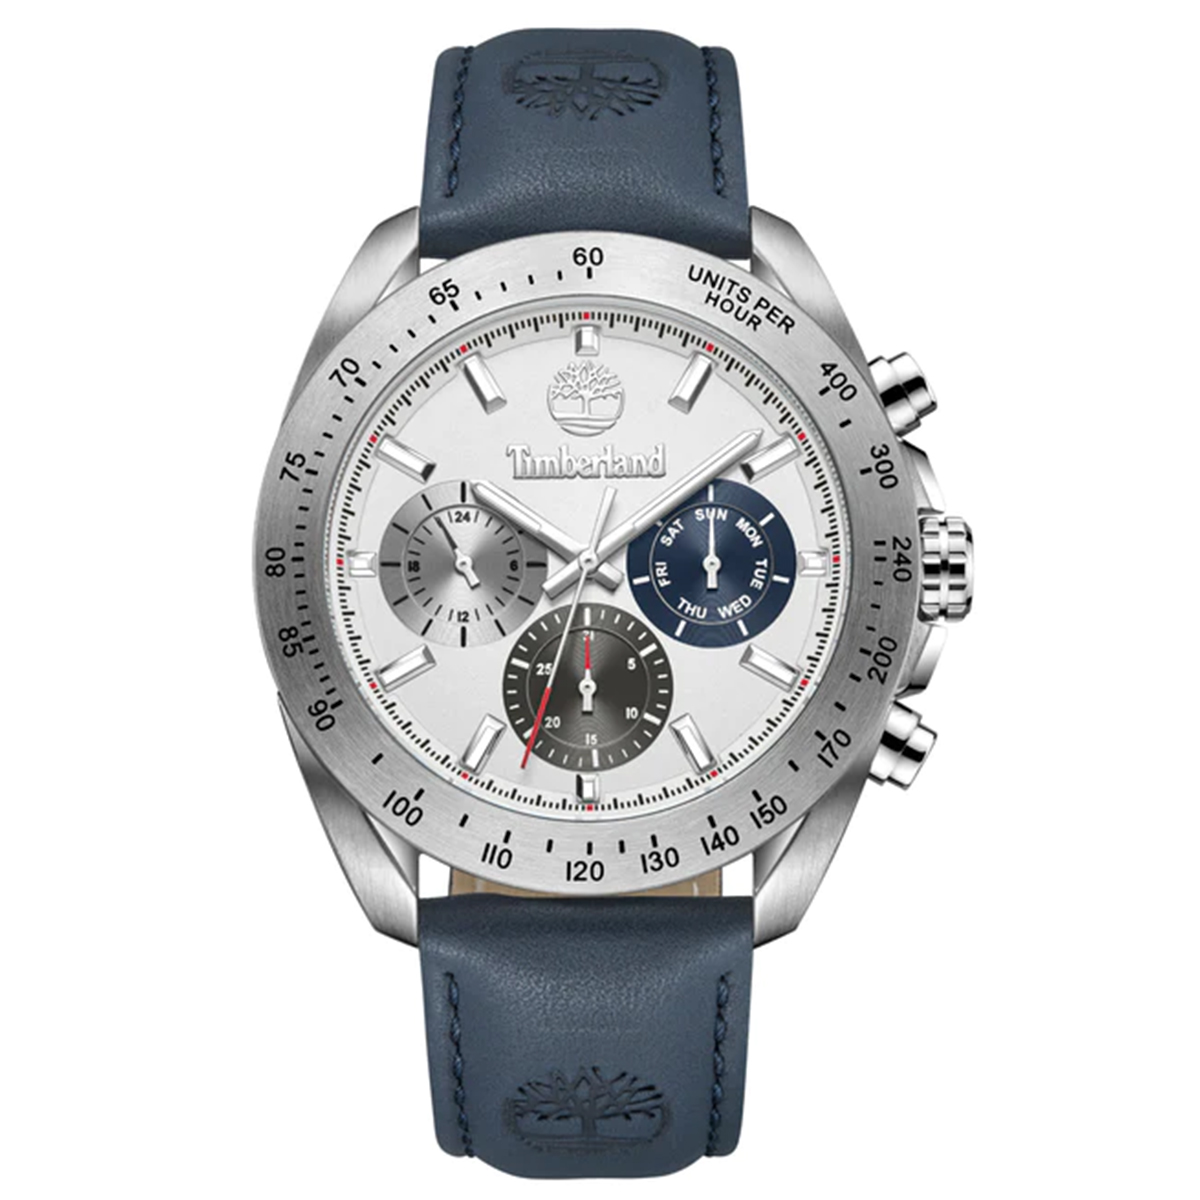 MONTRE TIMBERLAND HOMME M.FONCTION CUIR